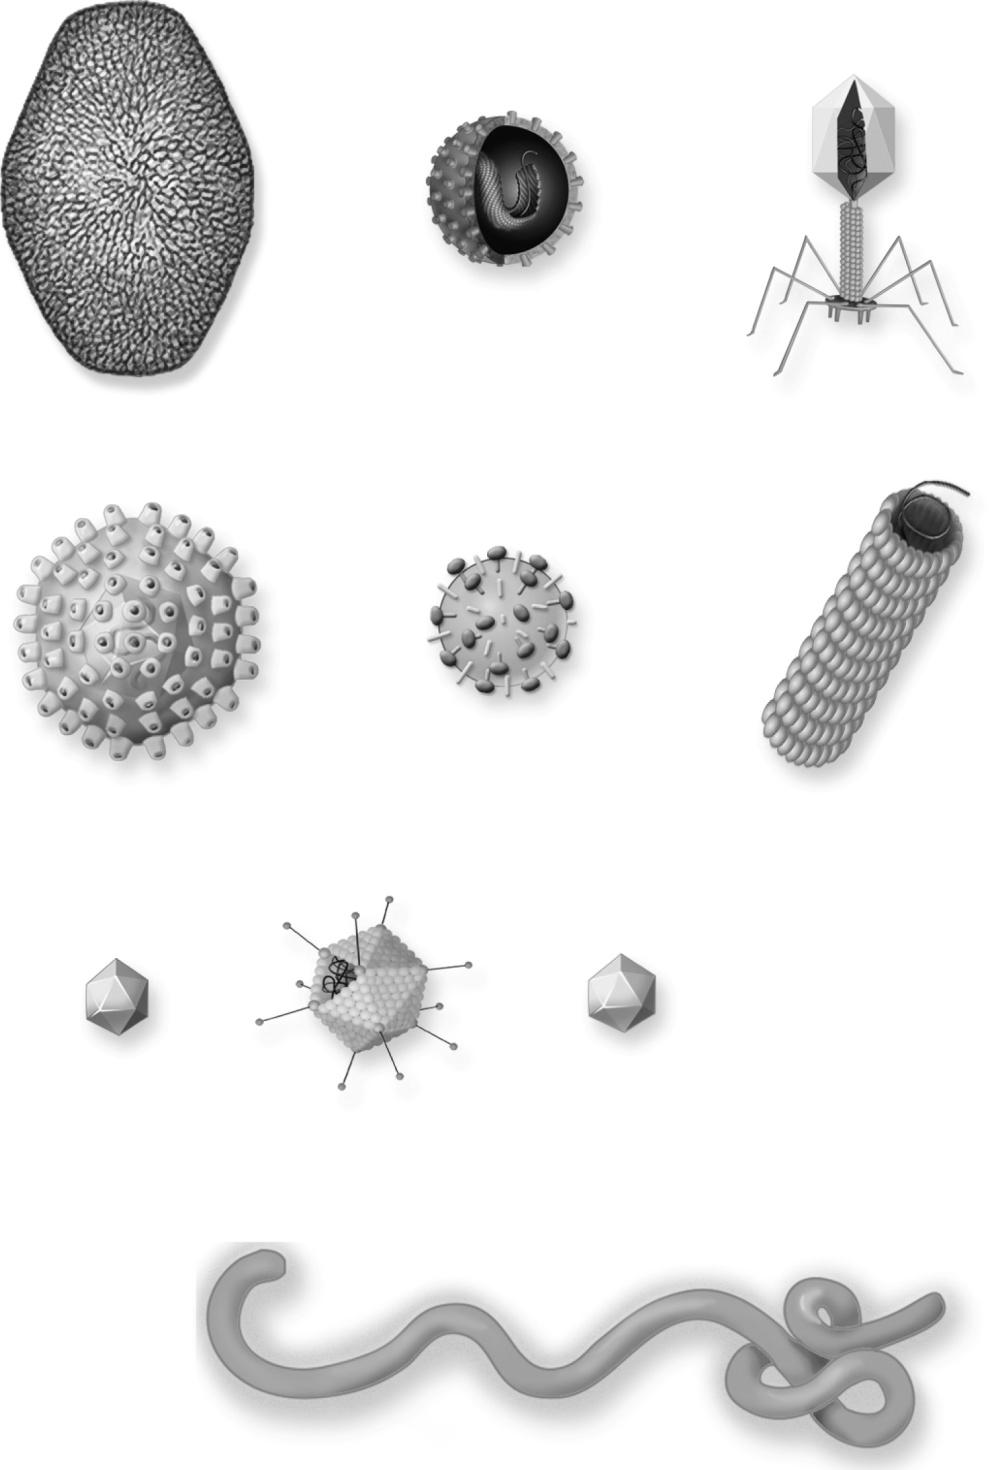 Viruses Copyright The McGraw-Hill Companies, Inc. Permission required for reproduction or display.